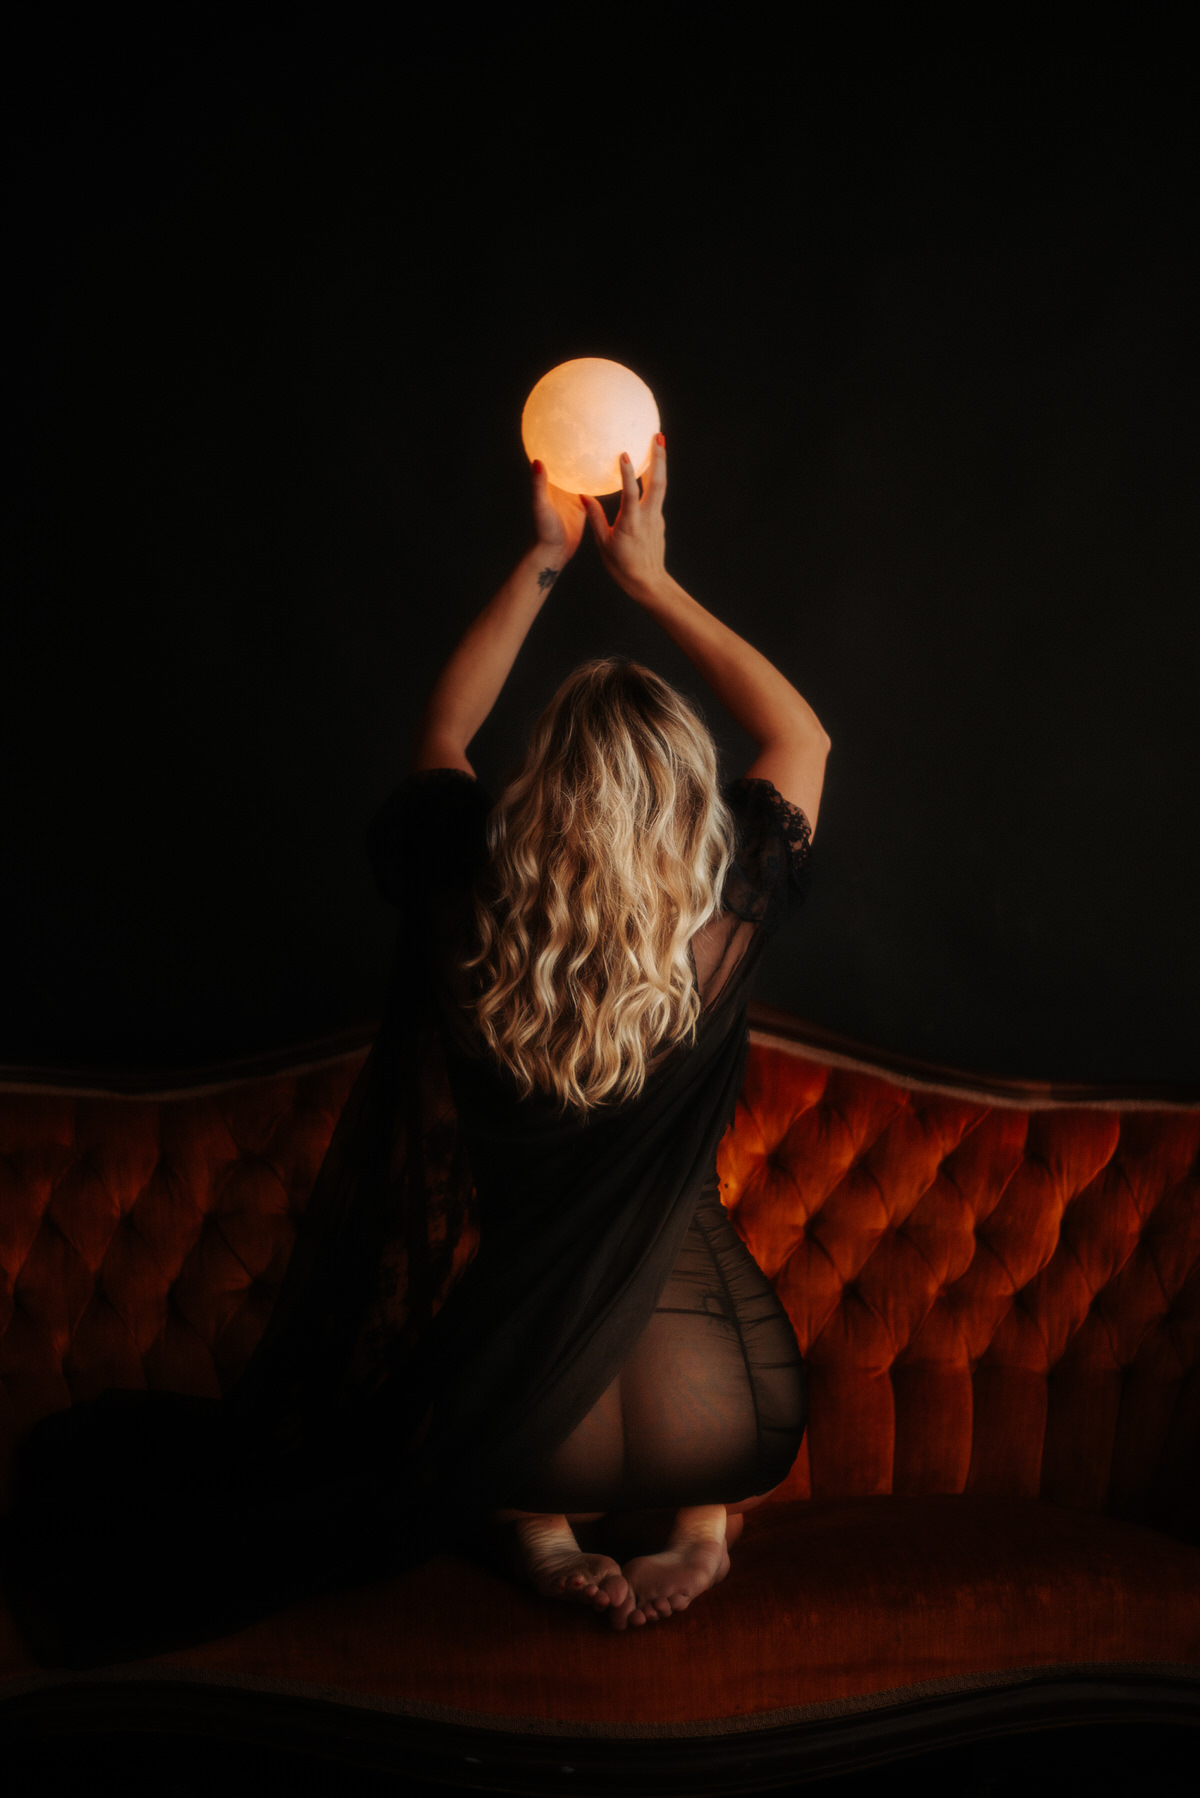 A woman with blonde hair kneeling on an orange couch while holding up a moon lamp above her head.